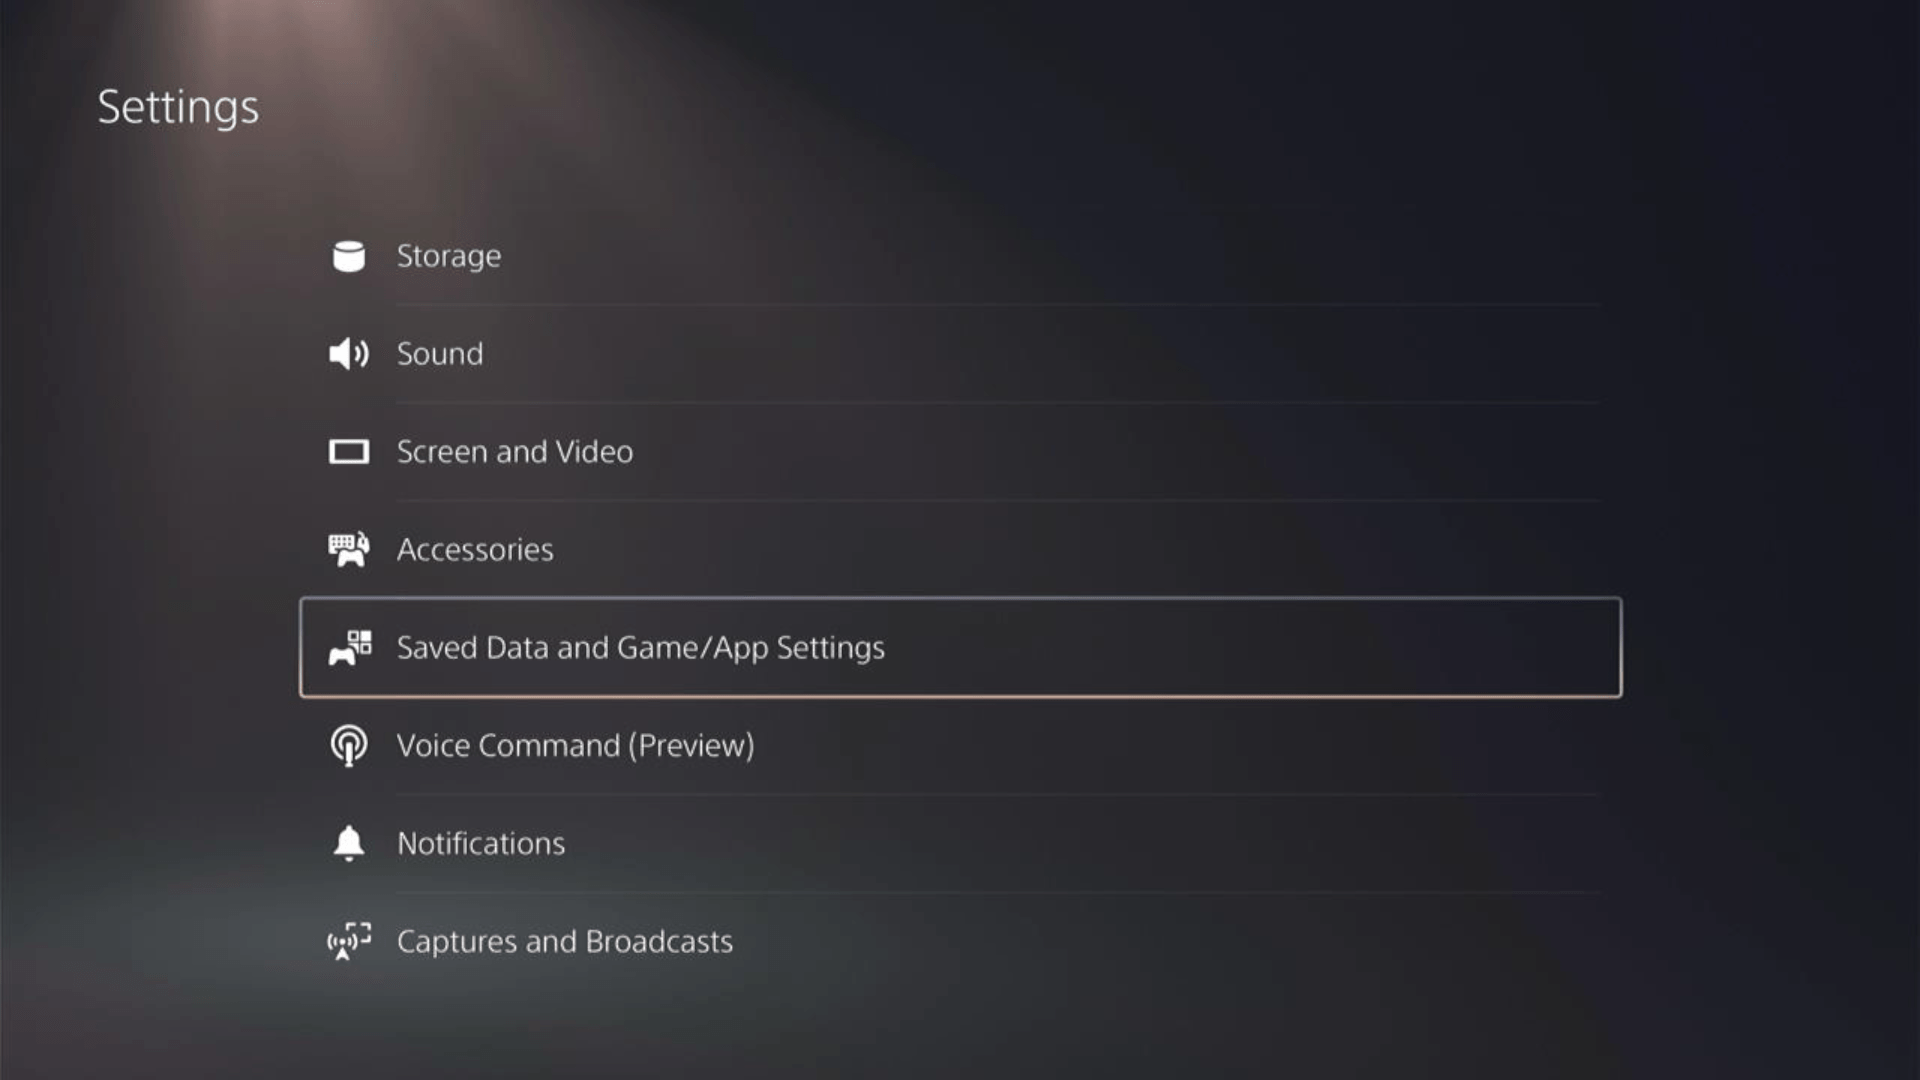 saved-gameapp-settings-screen-on-ps5